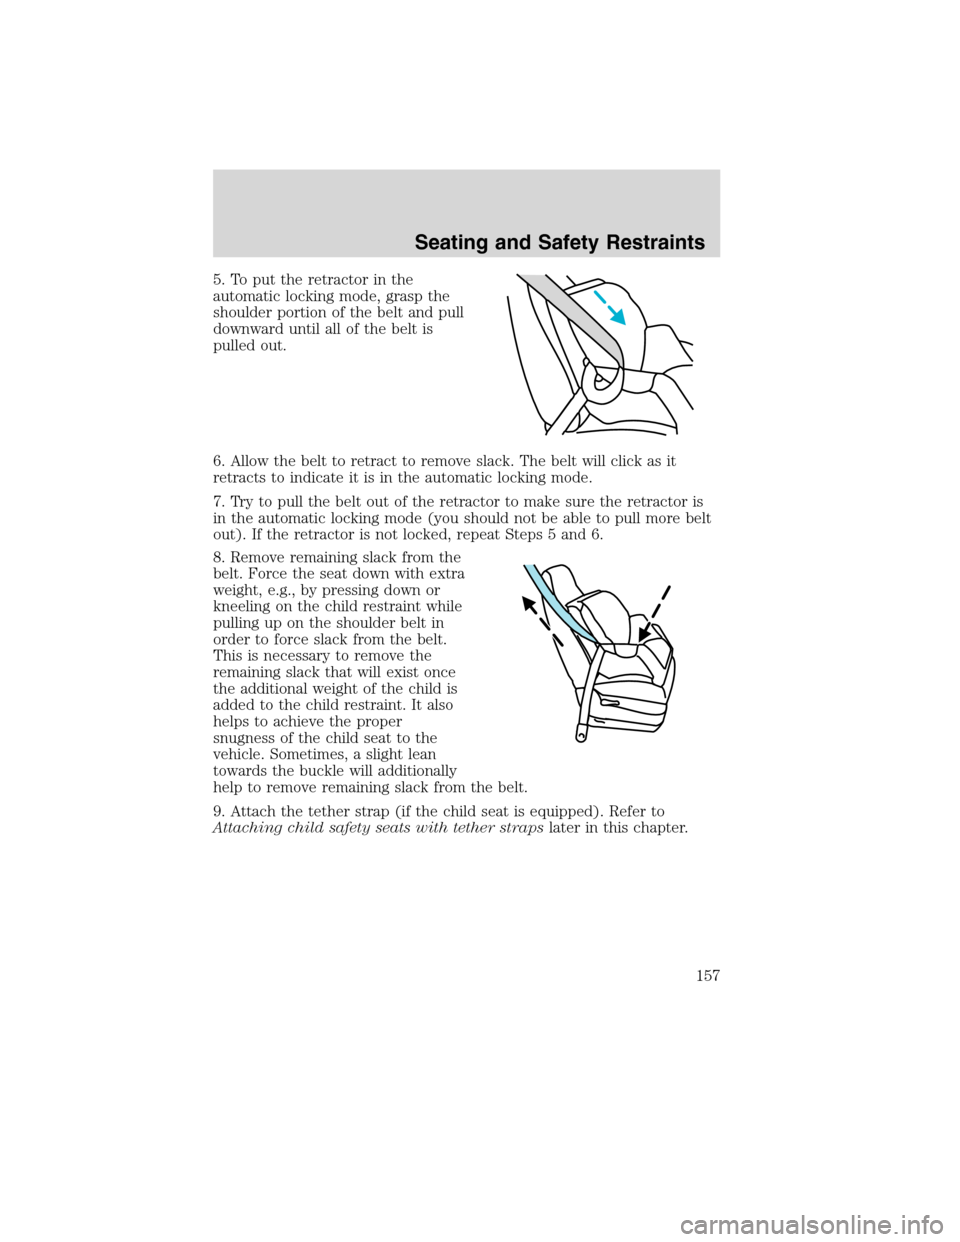 Mercury Milan 2010  s Owners Guide 5. To put the retractor in the
automatic locking mode, grasp the
shoulder portion of the belt and pull
downward until all of the belt is
pulled out.
6. Allow the belt to retract to remove slack. The b